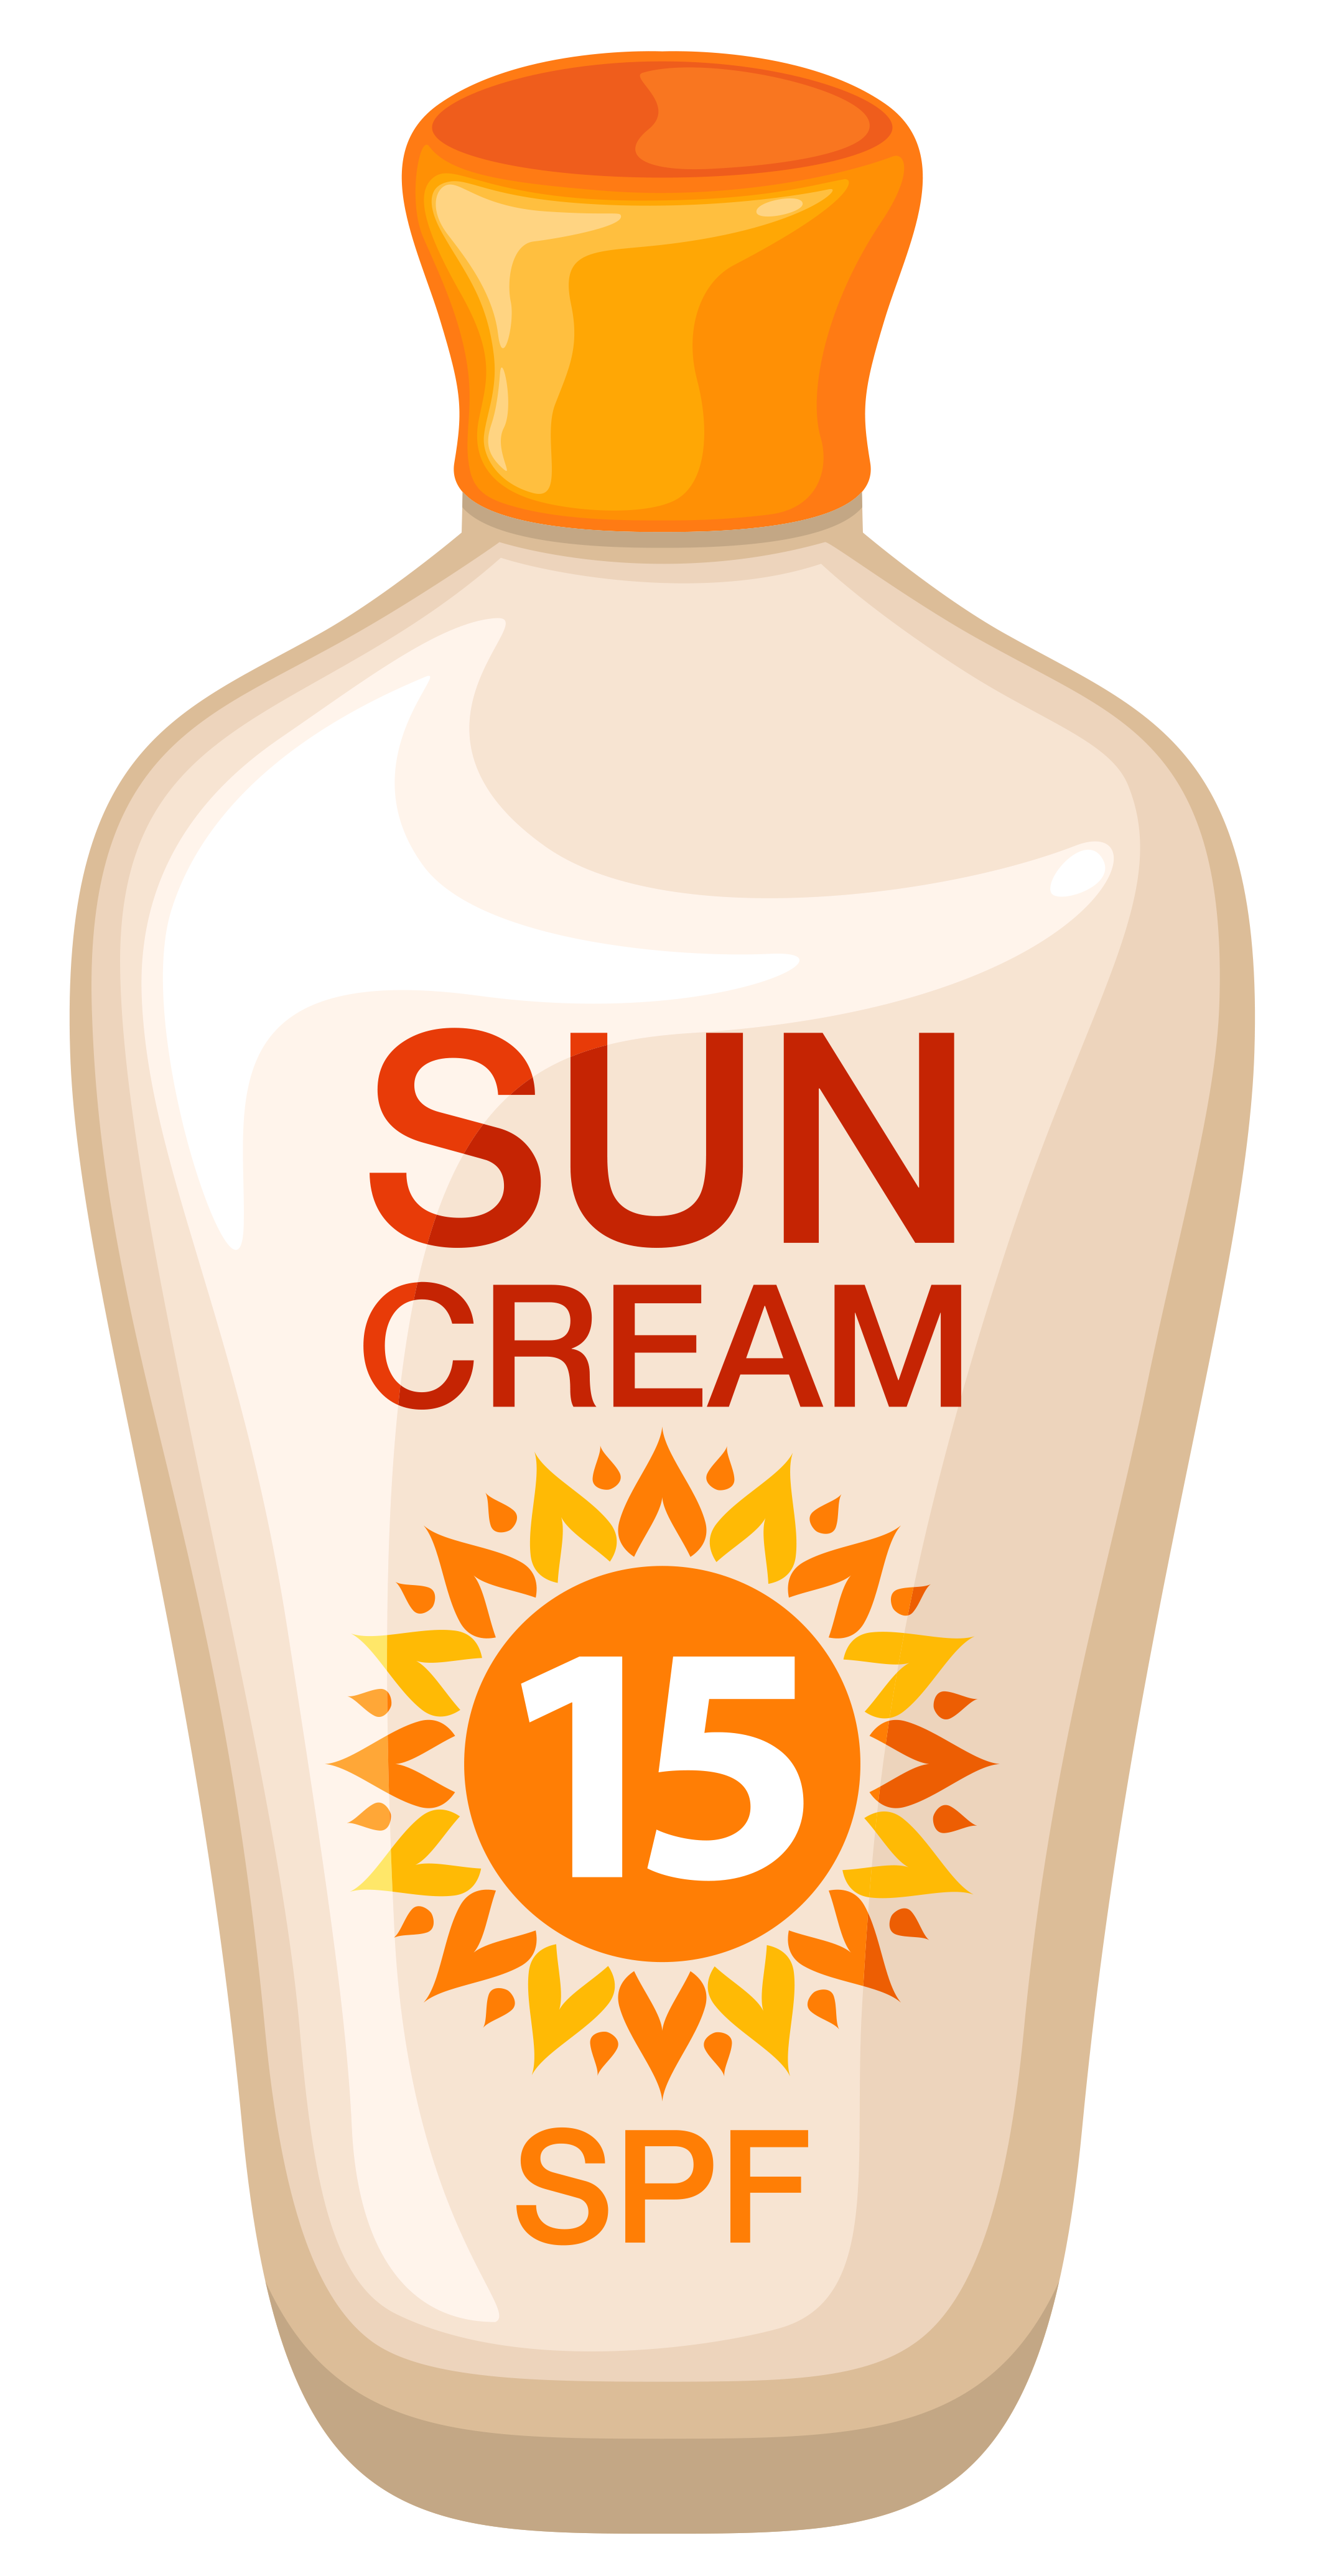 Sunscreen PNG Image​-Quality Image and Transparent PNG Free Clipart